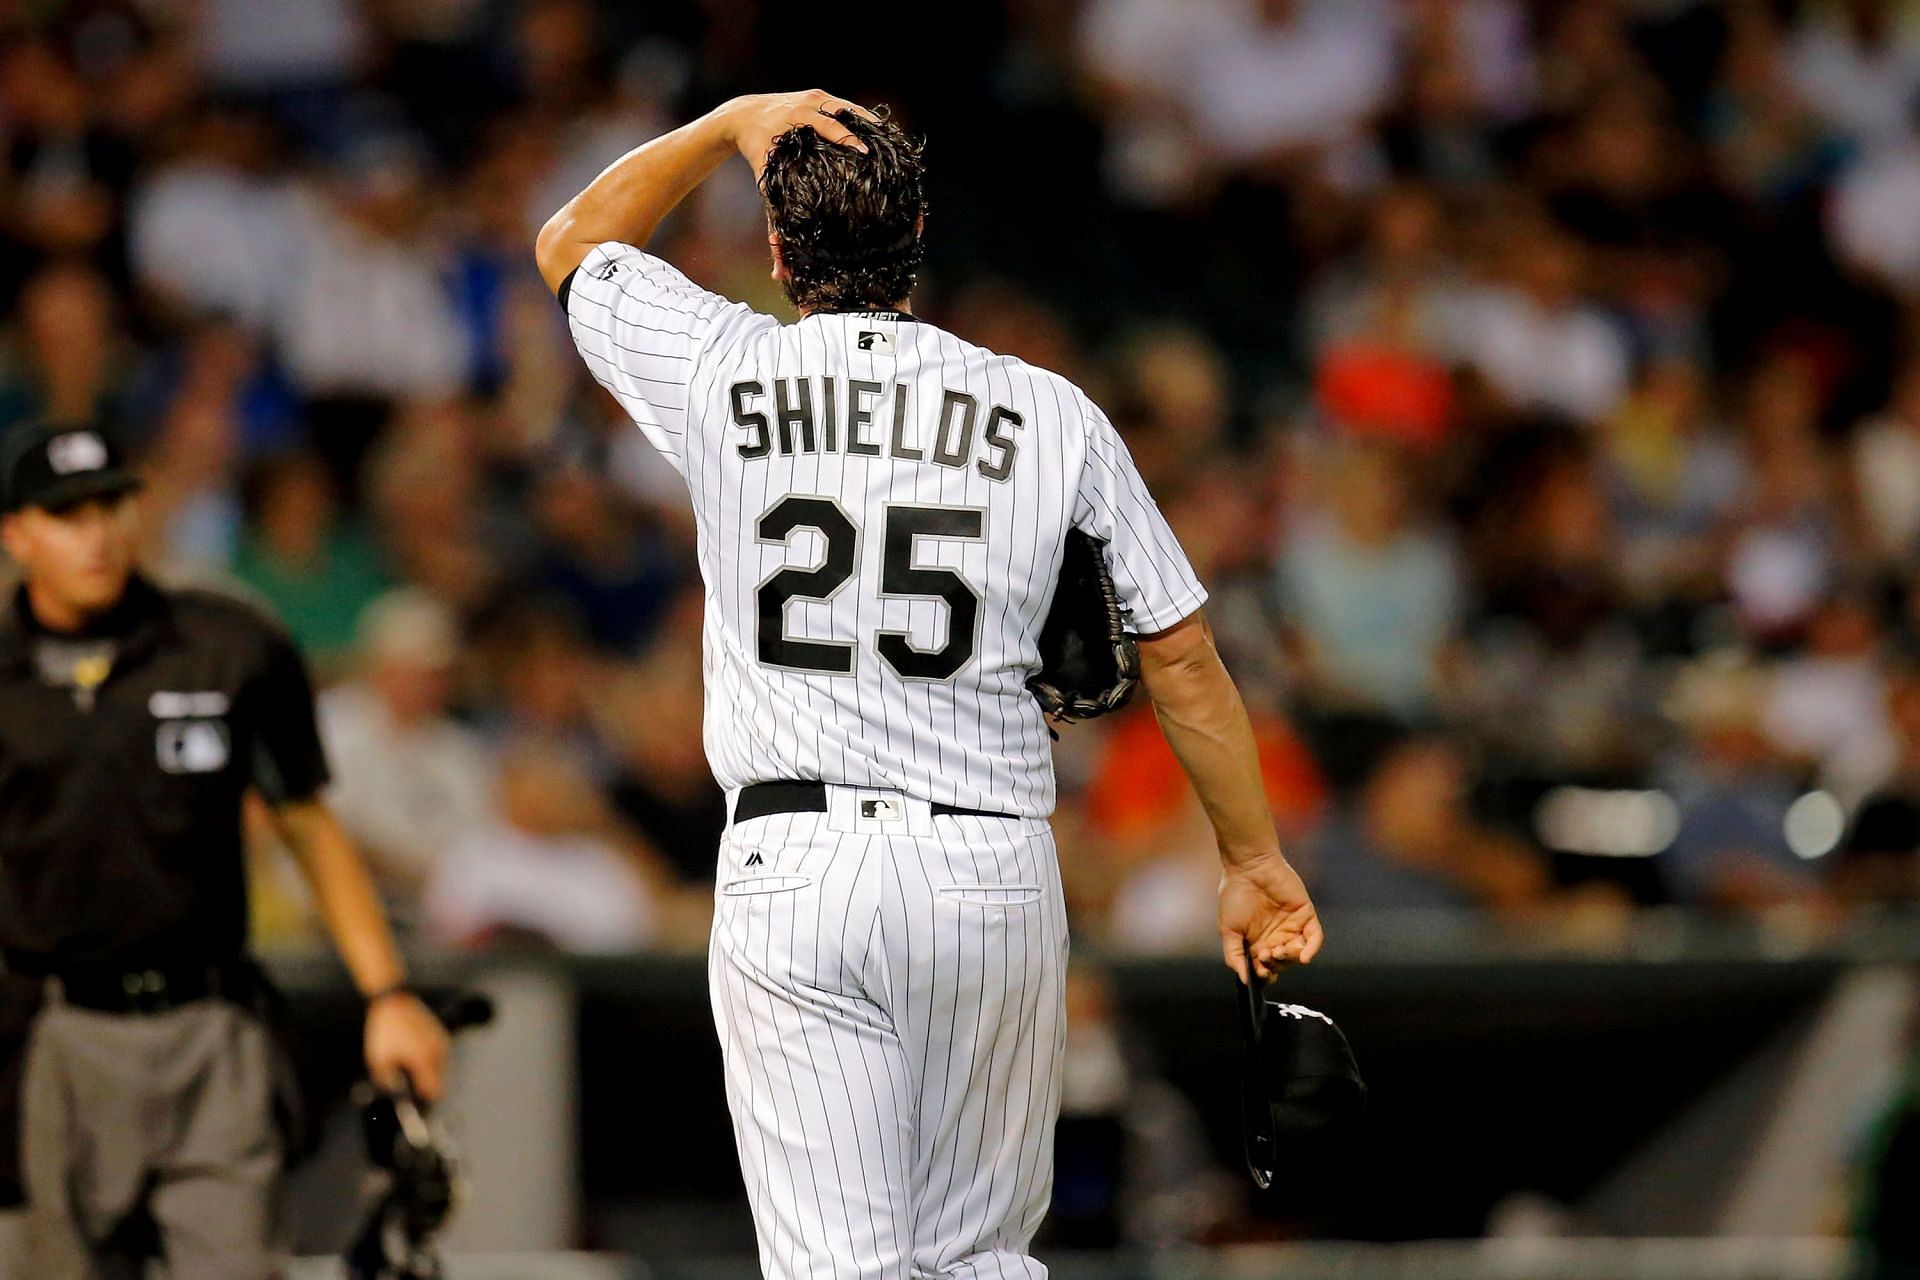 James Shields after giving up a home run to Miguel Cabrera